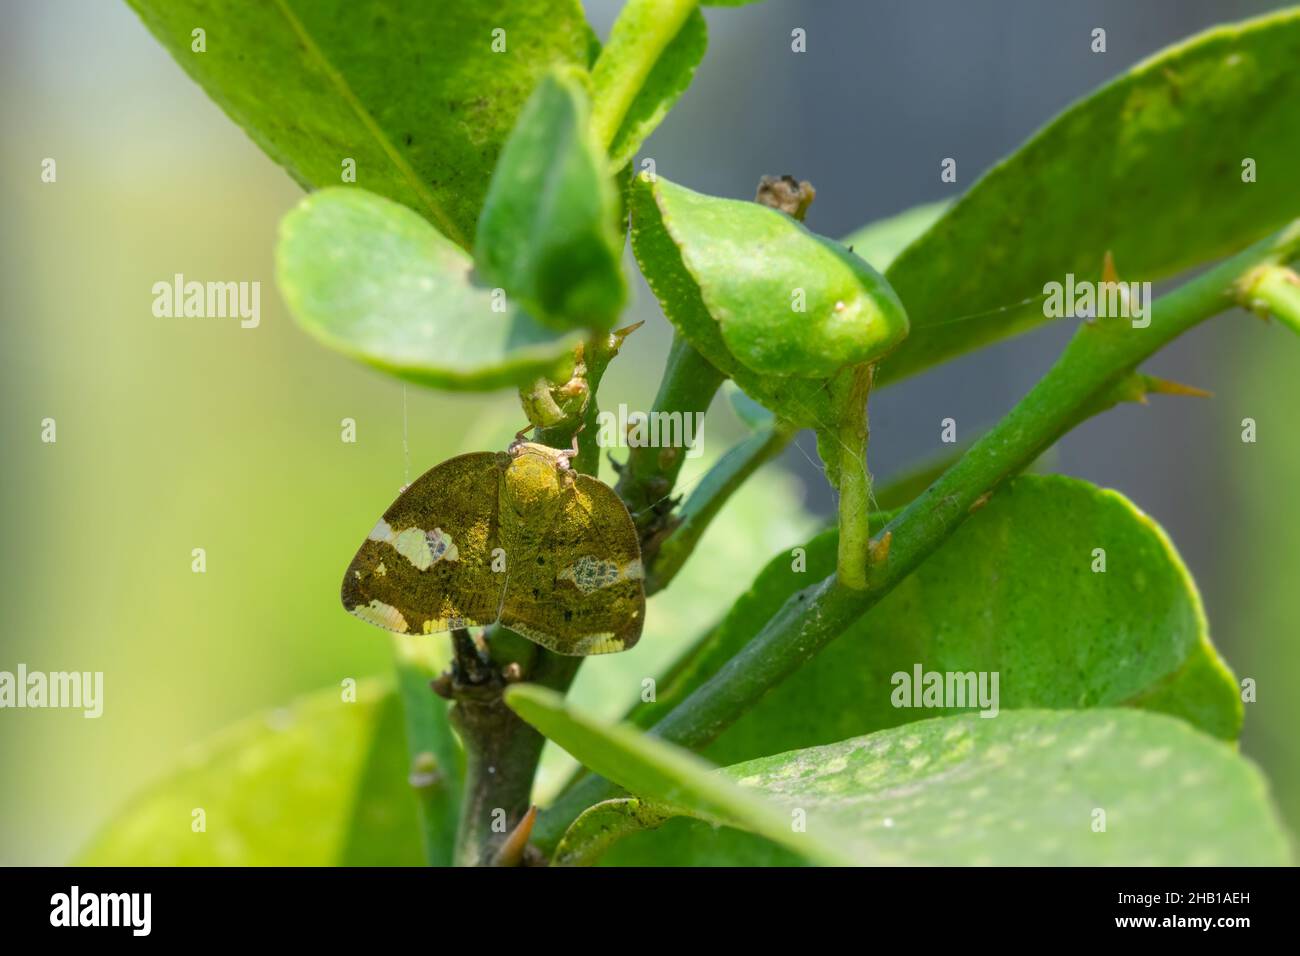 Hopper on the plant of acid lime which is known as passion vine hopper. It is a serious insect pest of the acid lime fruit crop plant. Stock Photo